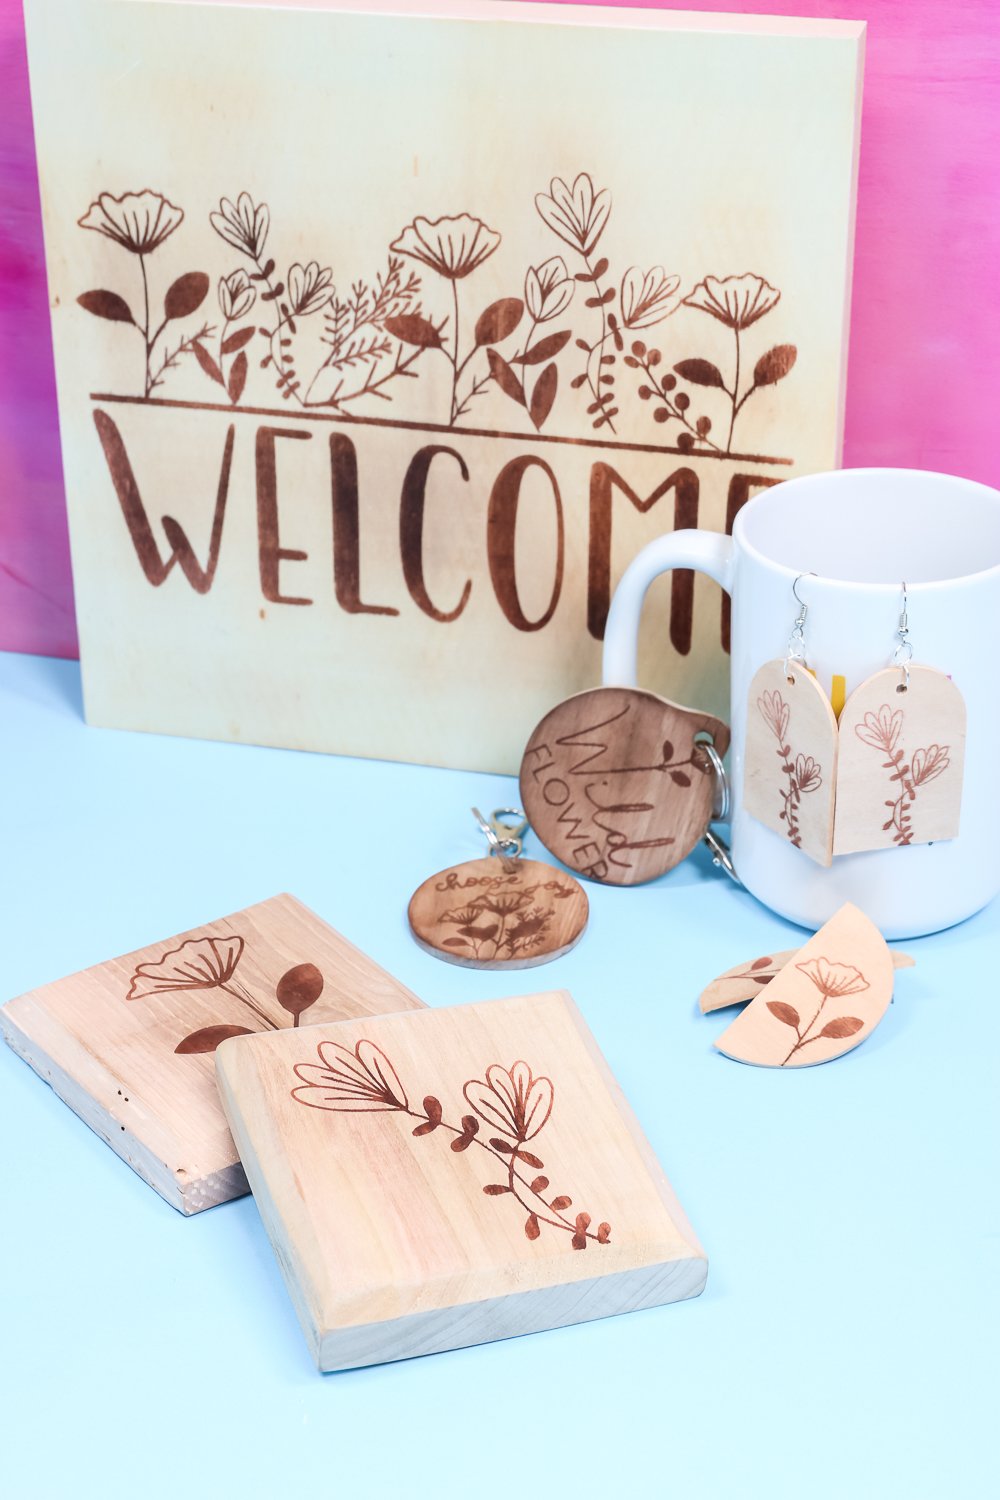 How to Buy the Best Wood Burning Kit for Kids This Christmas - Scorch Marker